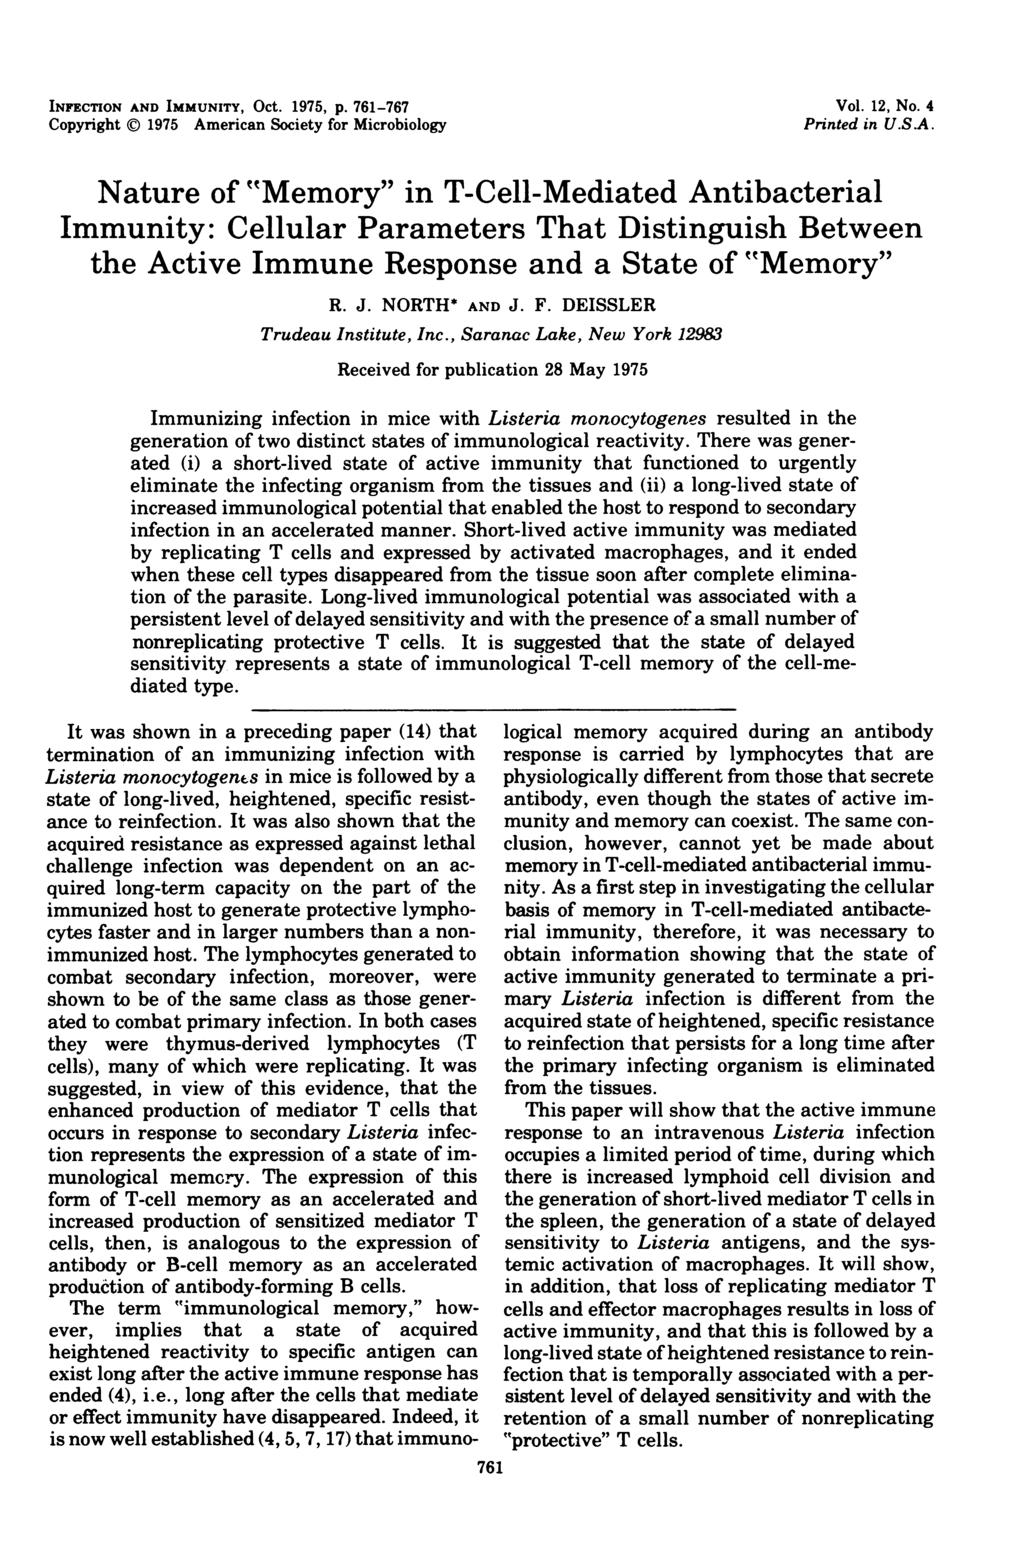 INFECTION AND IMMUNITY, Oct. 1975, p. 761-767 Copyright ) 1975 American Society for Microbiology Vol. 12, No. 4 Printed in U.S.A. Nature of "Memory" in T-Cell-Mediated Antibacterial Immunity: Cellular Parameters That Distinguish Between the Active Immune Response and a State of "Memory" R.